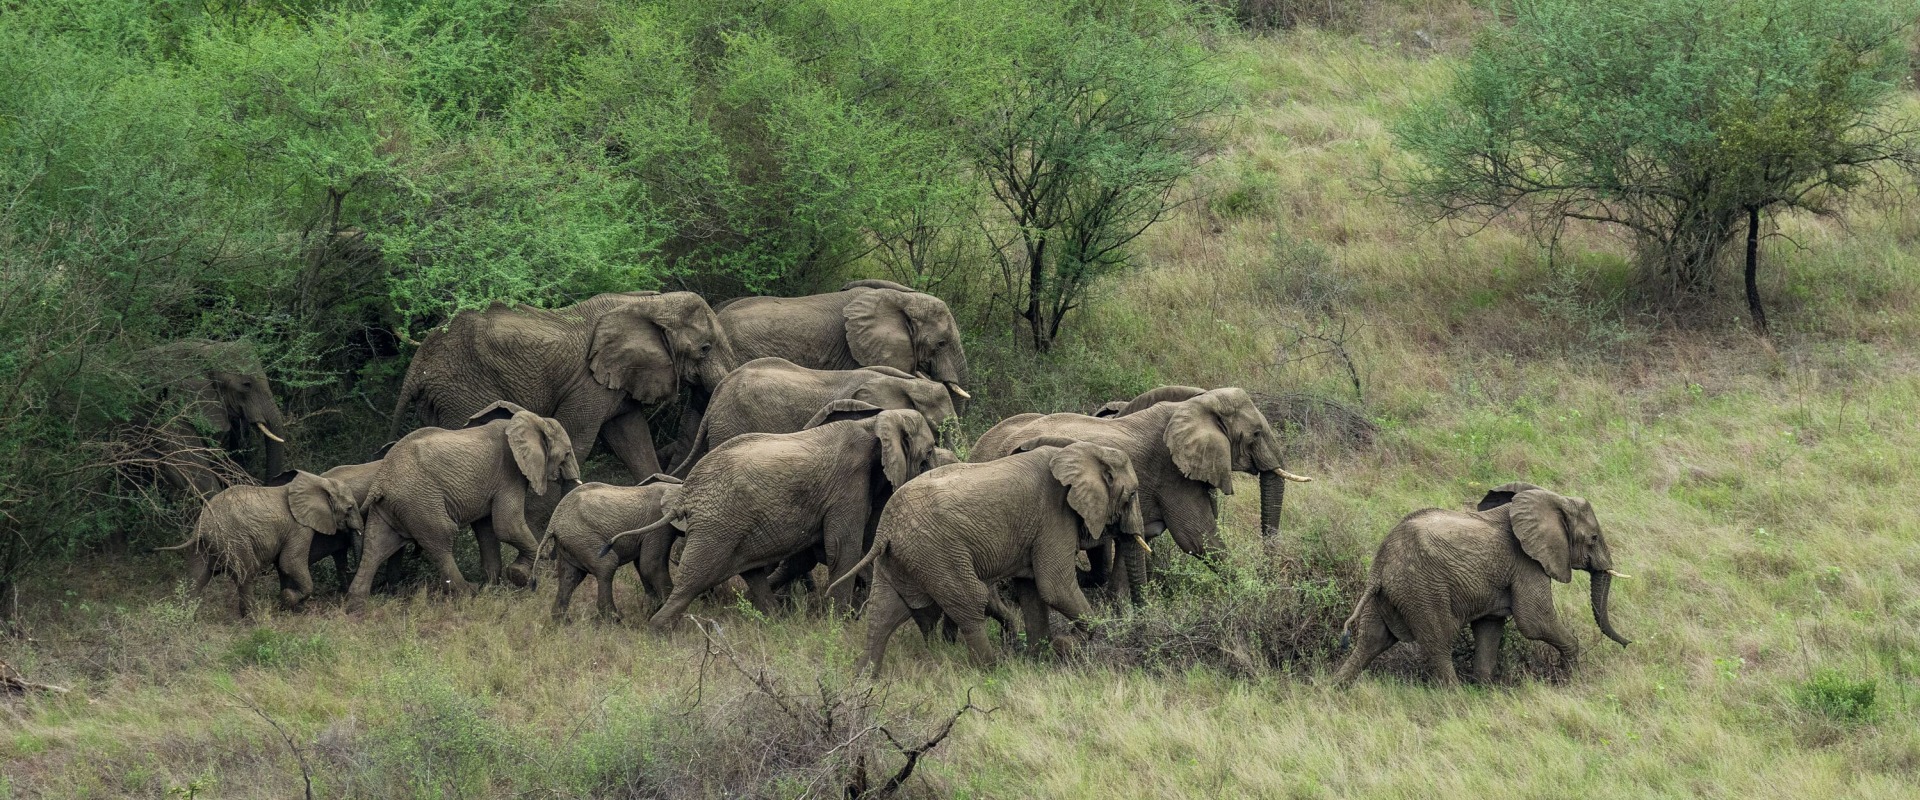 A herd of elephants in Boma and Badingilo National Parks, South Sudan, courtesy African Parks/© Marcus Westberg